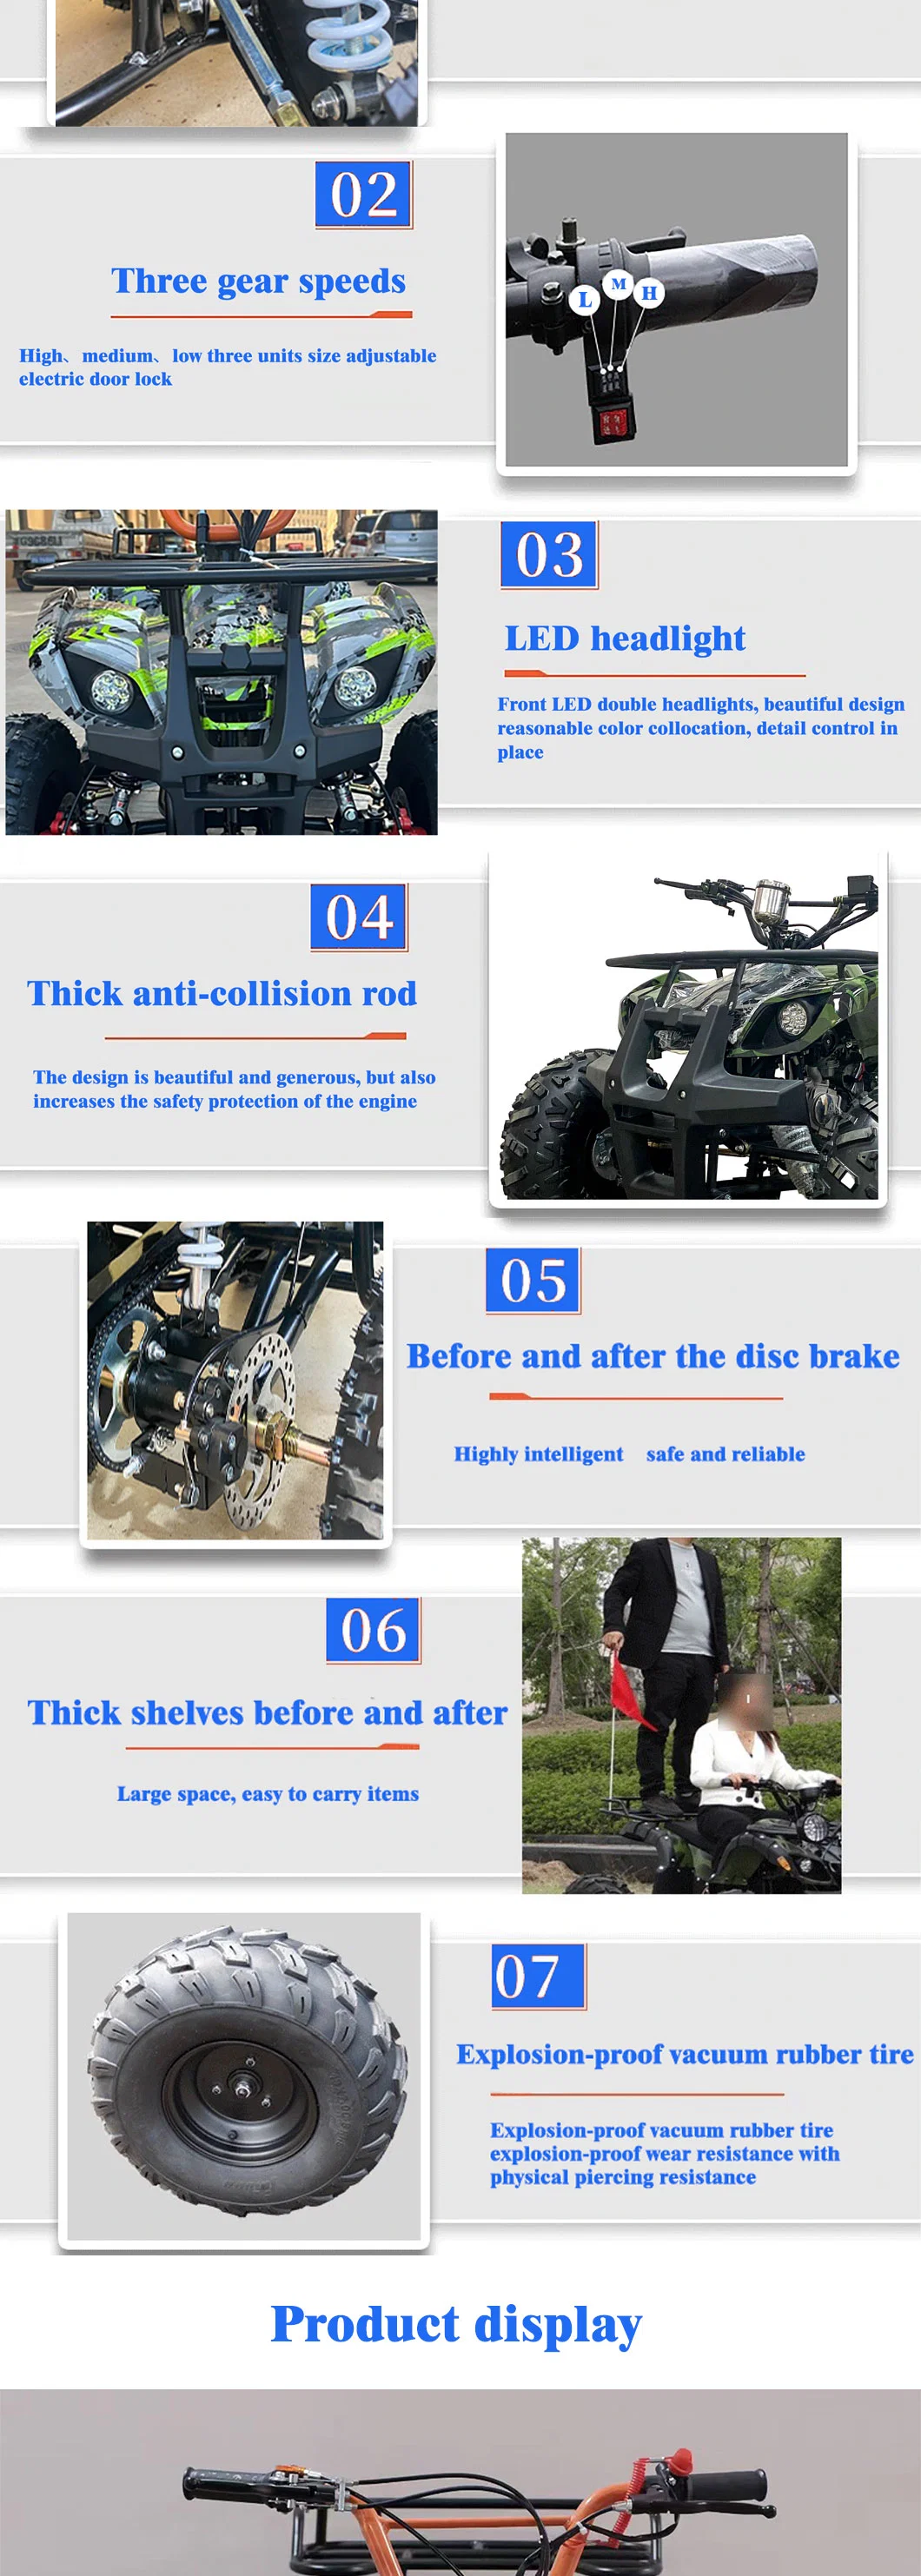 49cc Kid-Friendly and Safe on-Road ATV